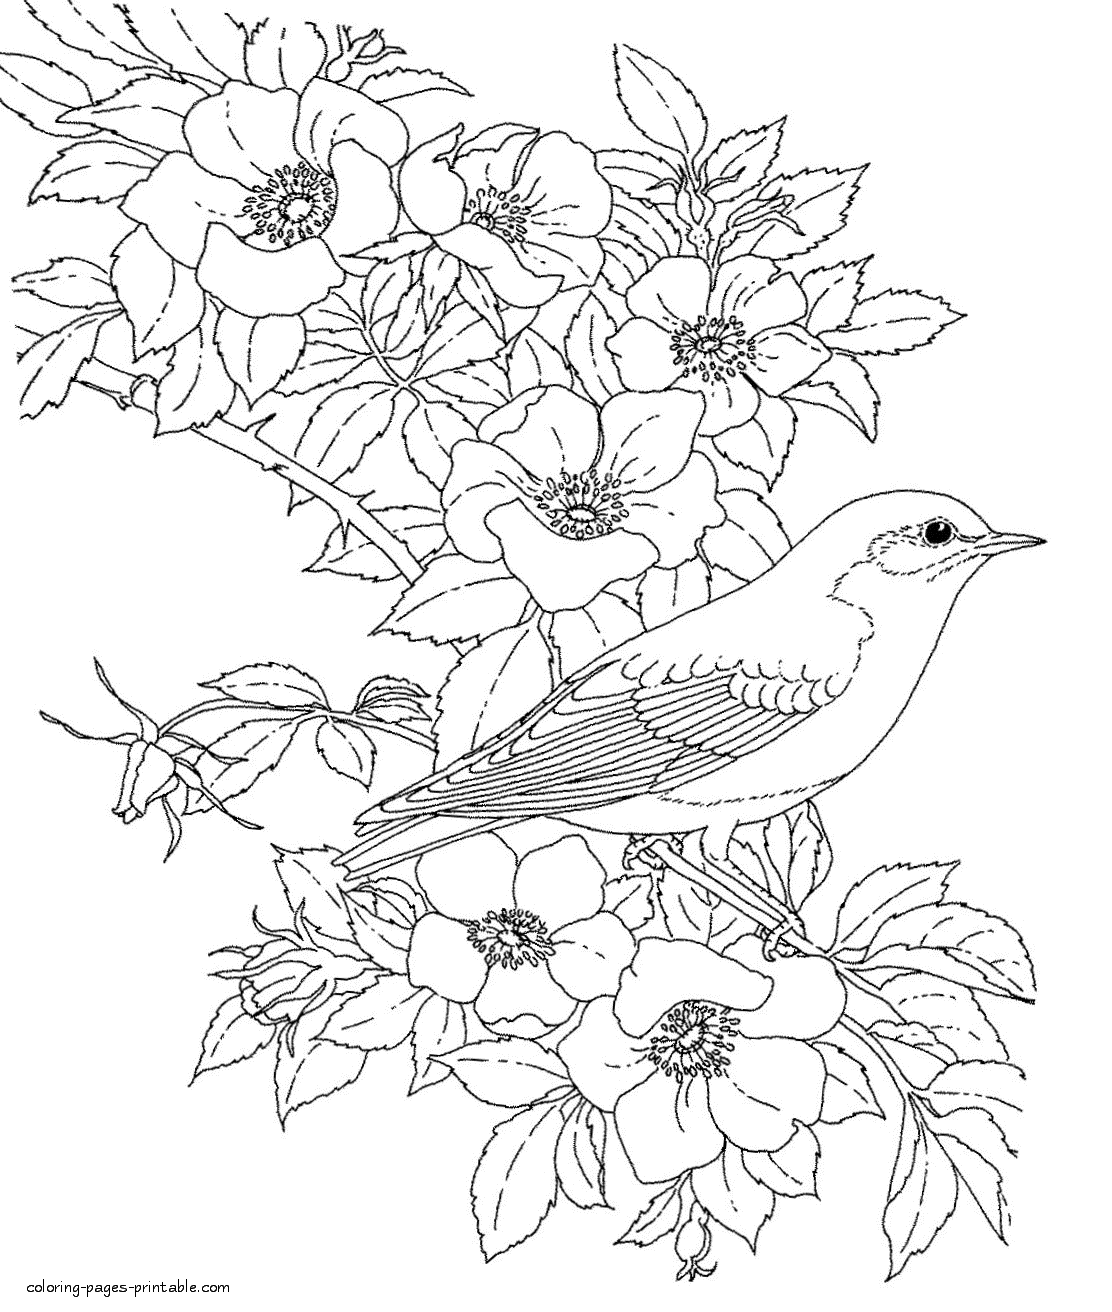 Free Coloring Pages For Adults. Bird And Flowers